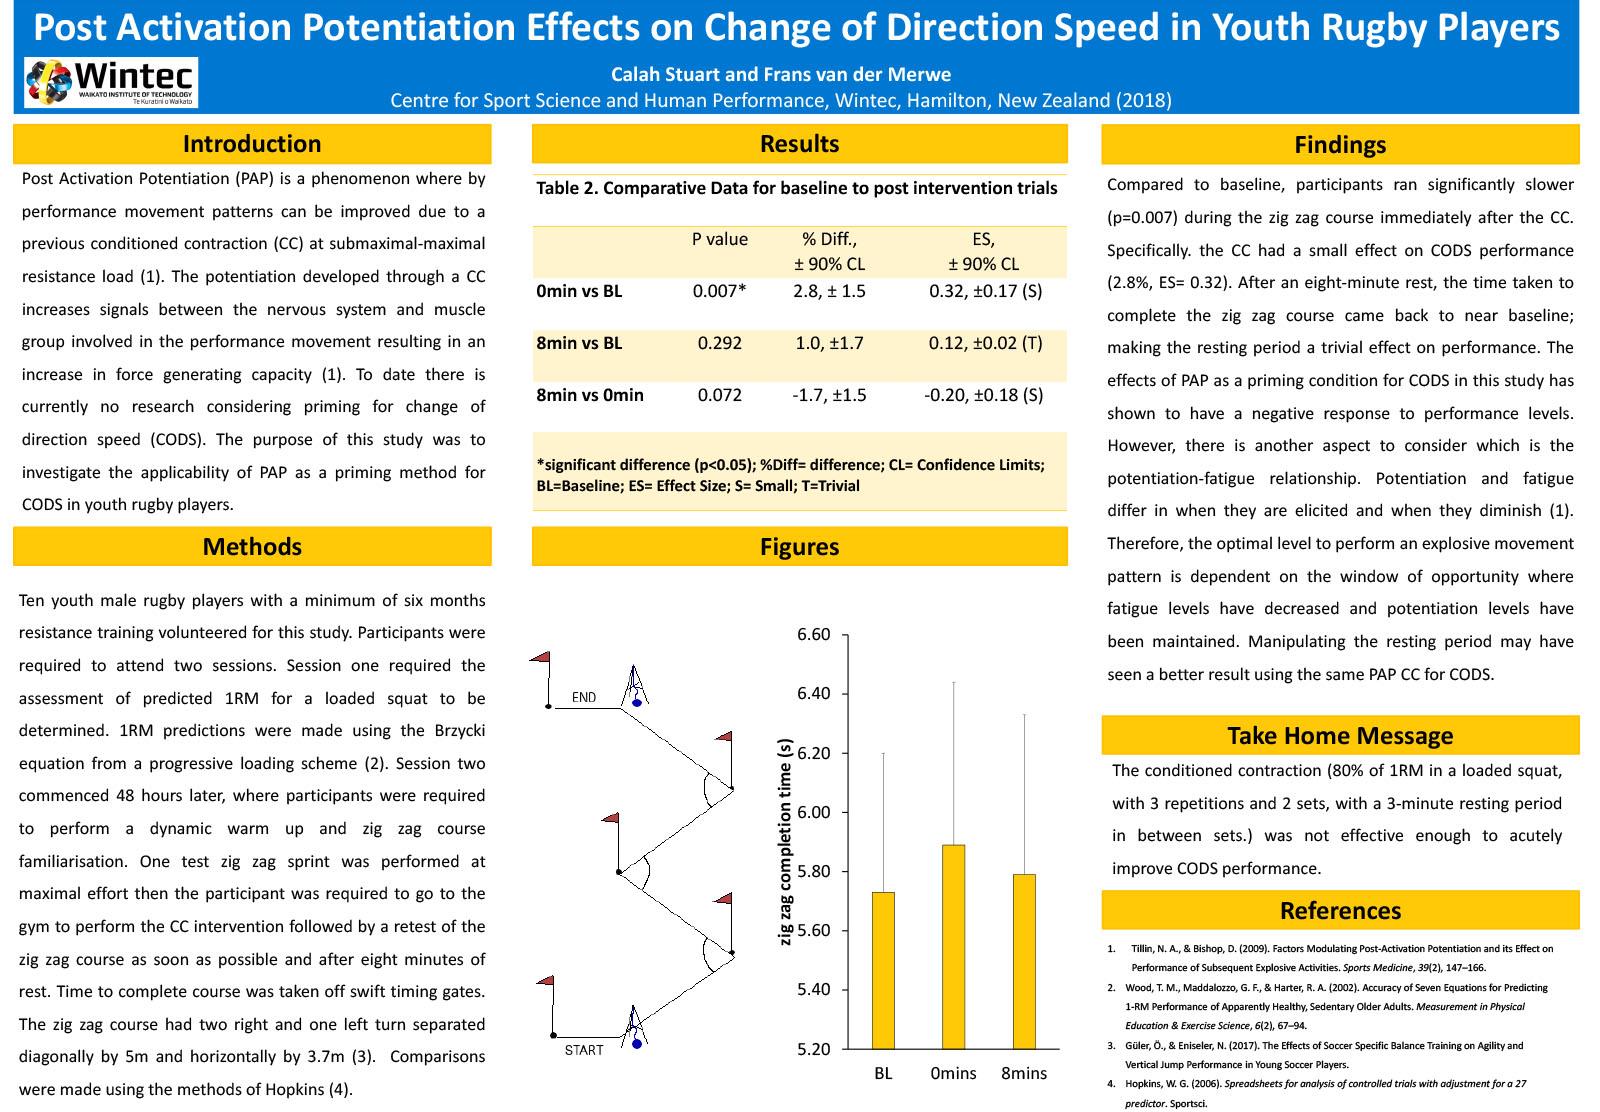 Post Activation Potentiation Effects on Change of Direction Speed in Youth Rugby Players